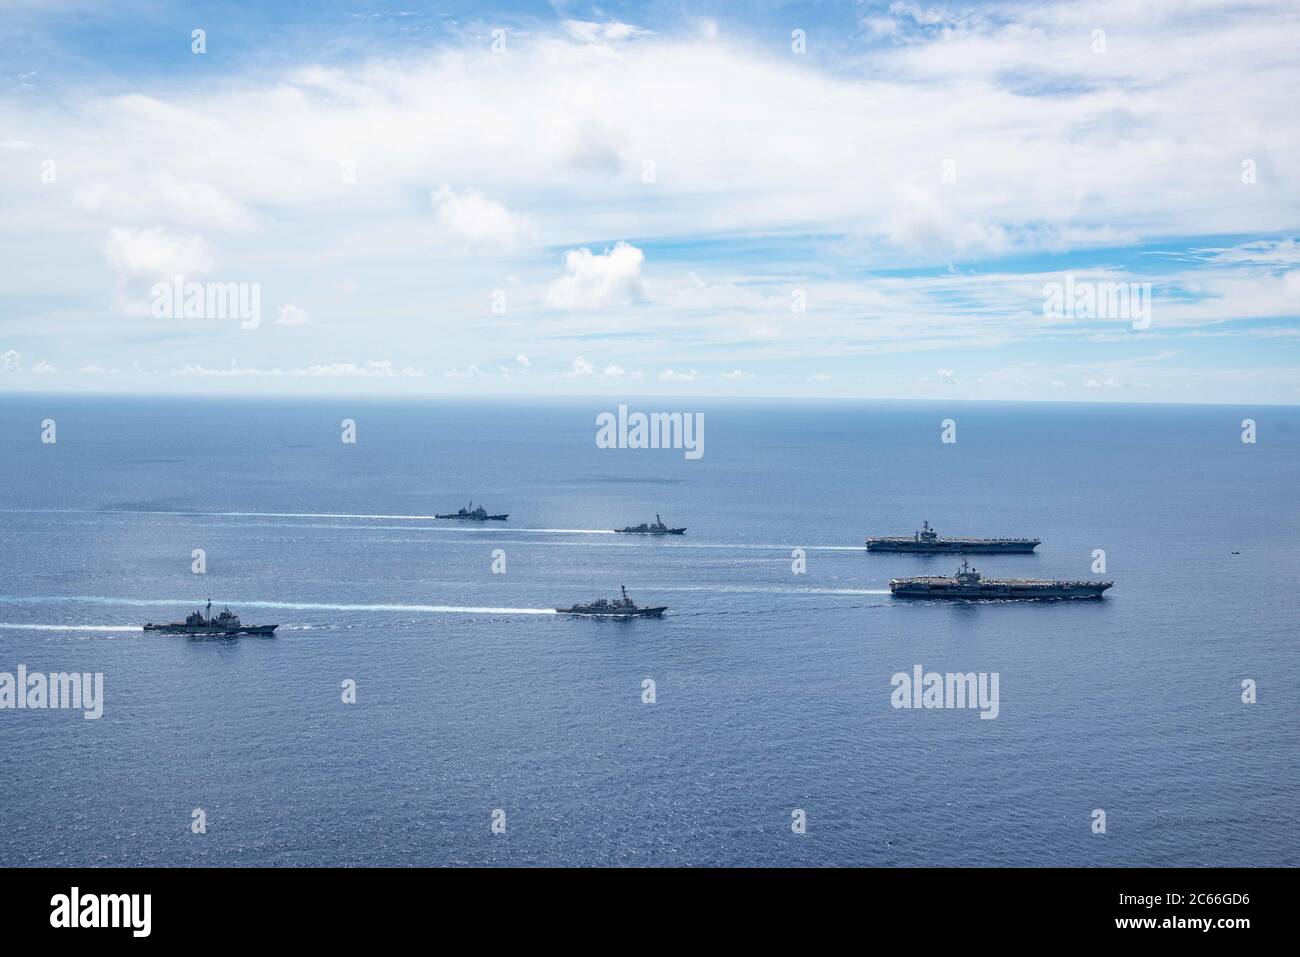 The U.S. Navy Nimitz-class aircraft carriers USS Ronald Reagan and USS Nimitz along with their Carrier Strike Groups steam in formation during dual-carrier operations July 6, 2020 in the South China Sea. Stock Photo